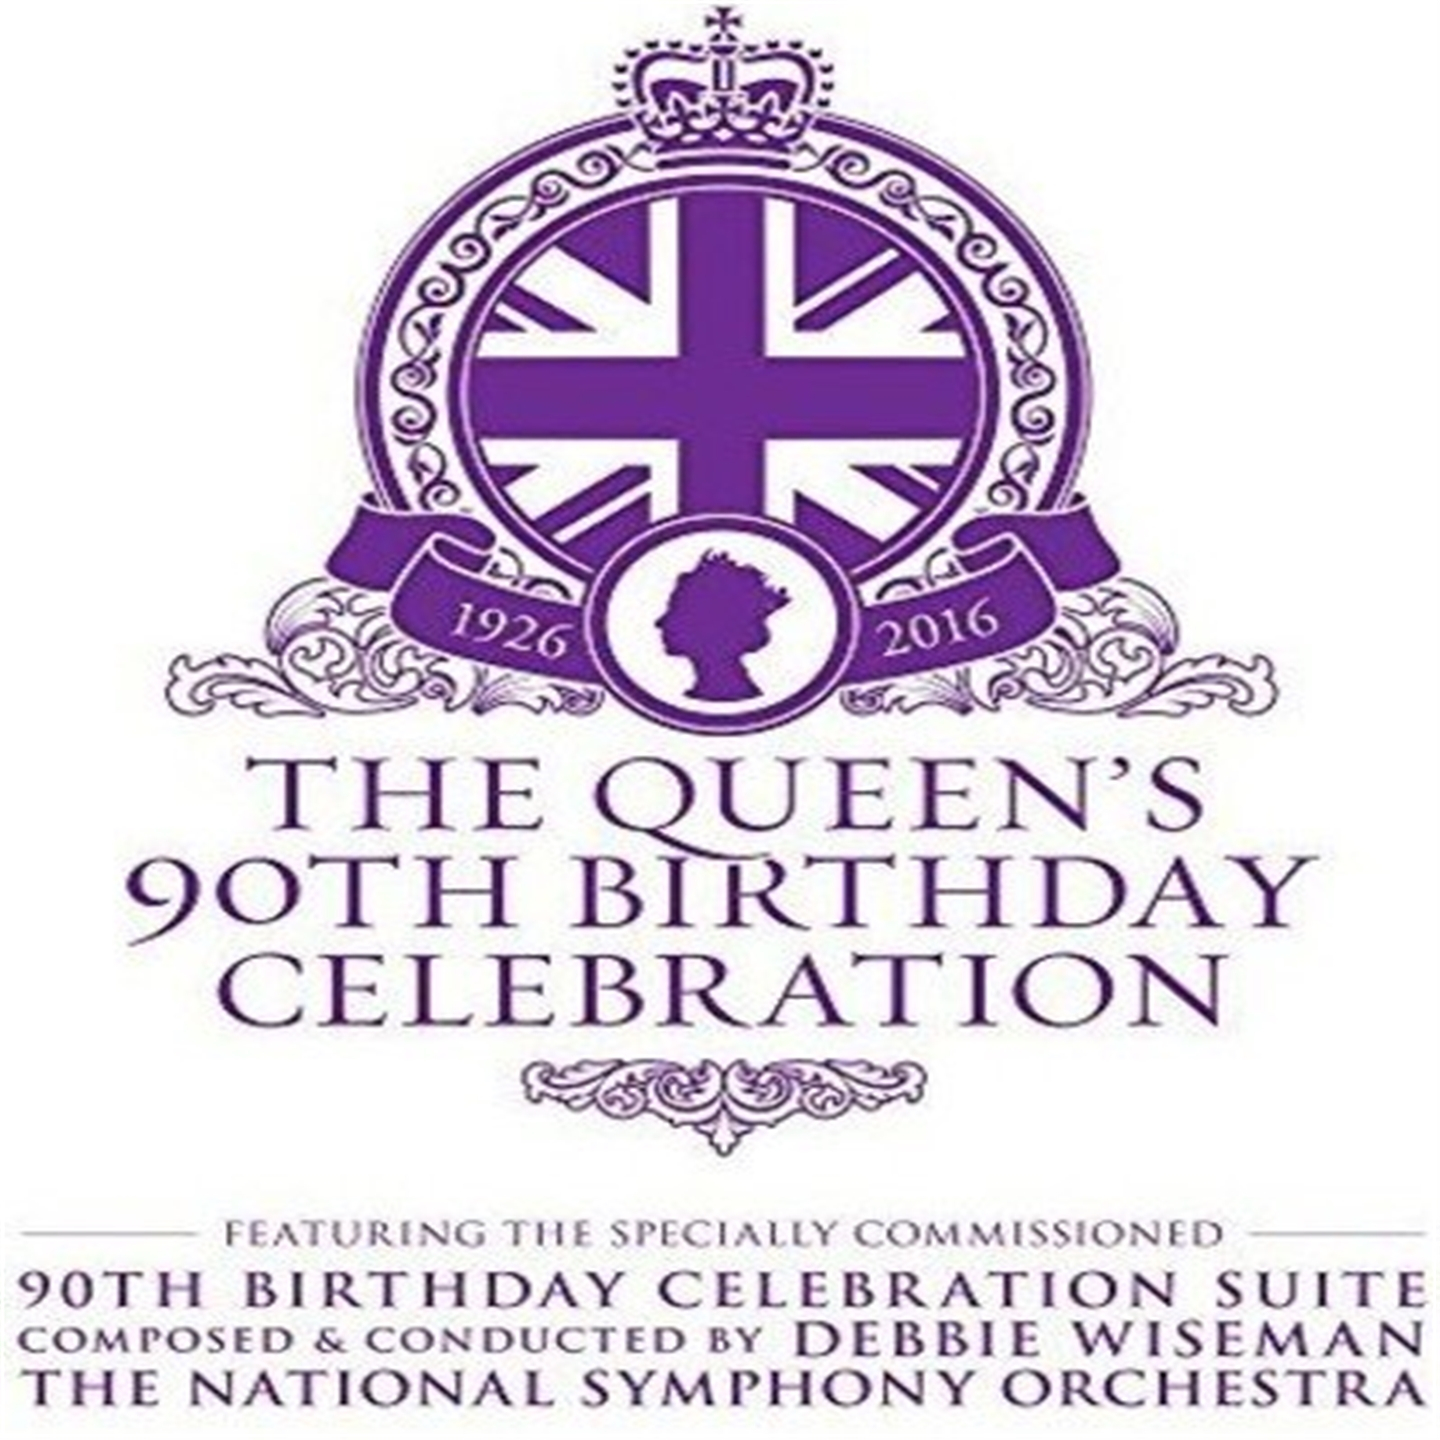 THE QUEEN'S 90TH BIRTHDAY CELEBRATION